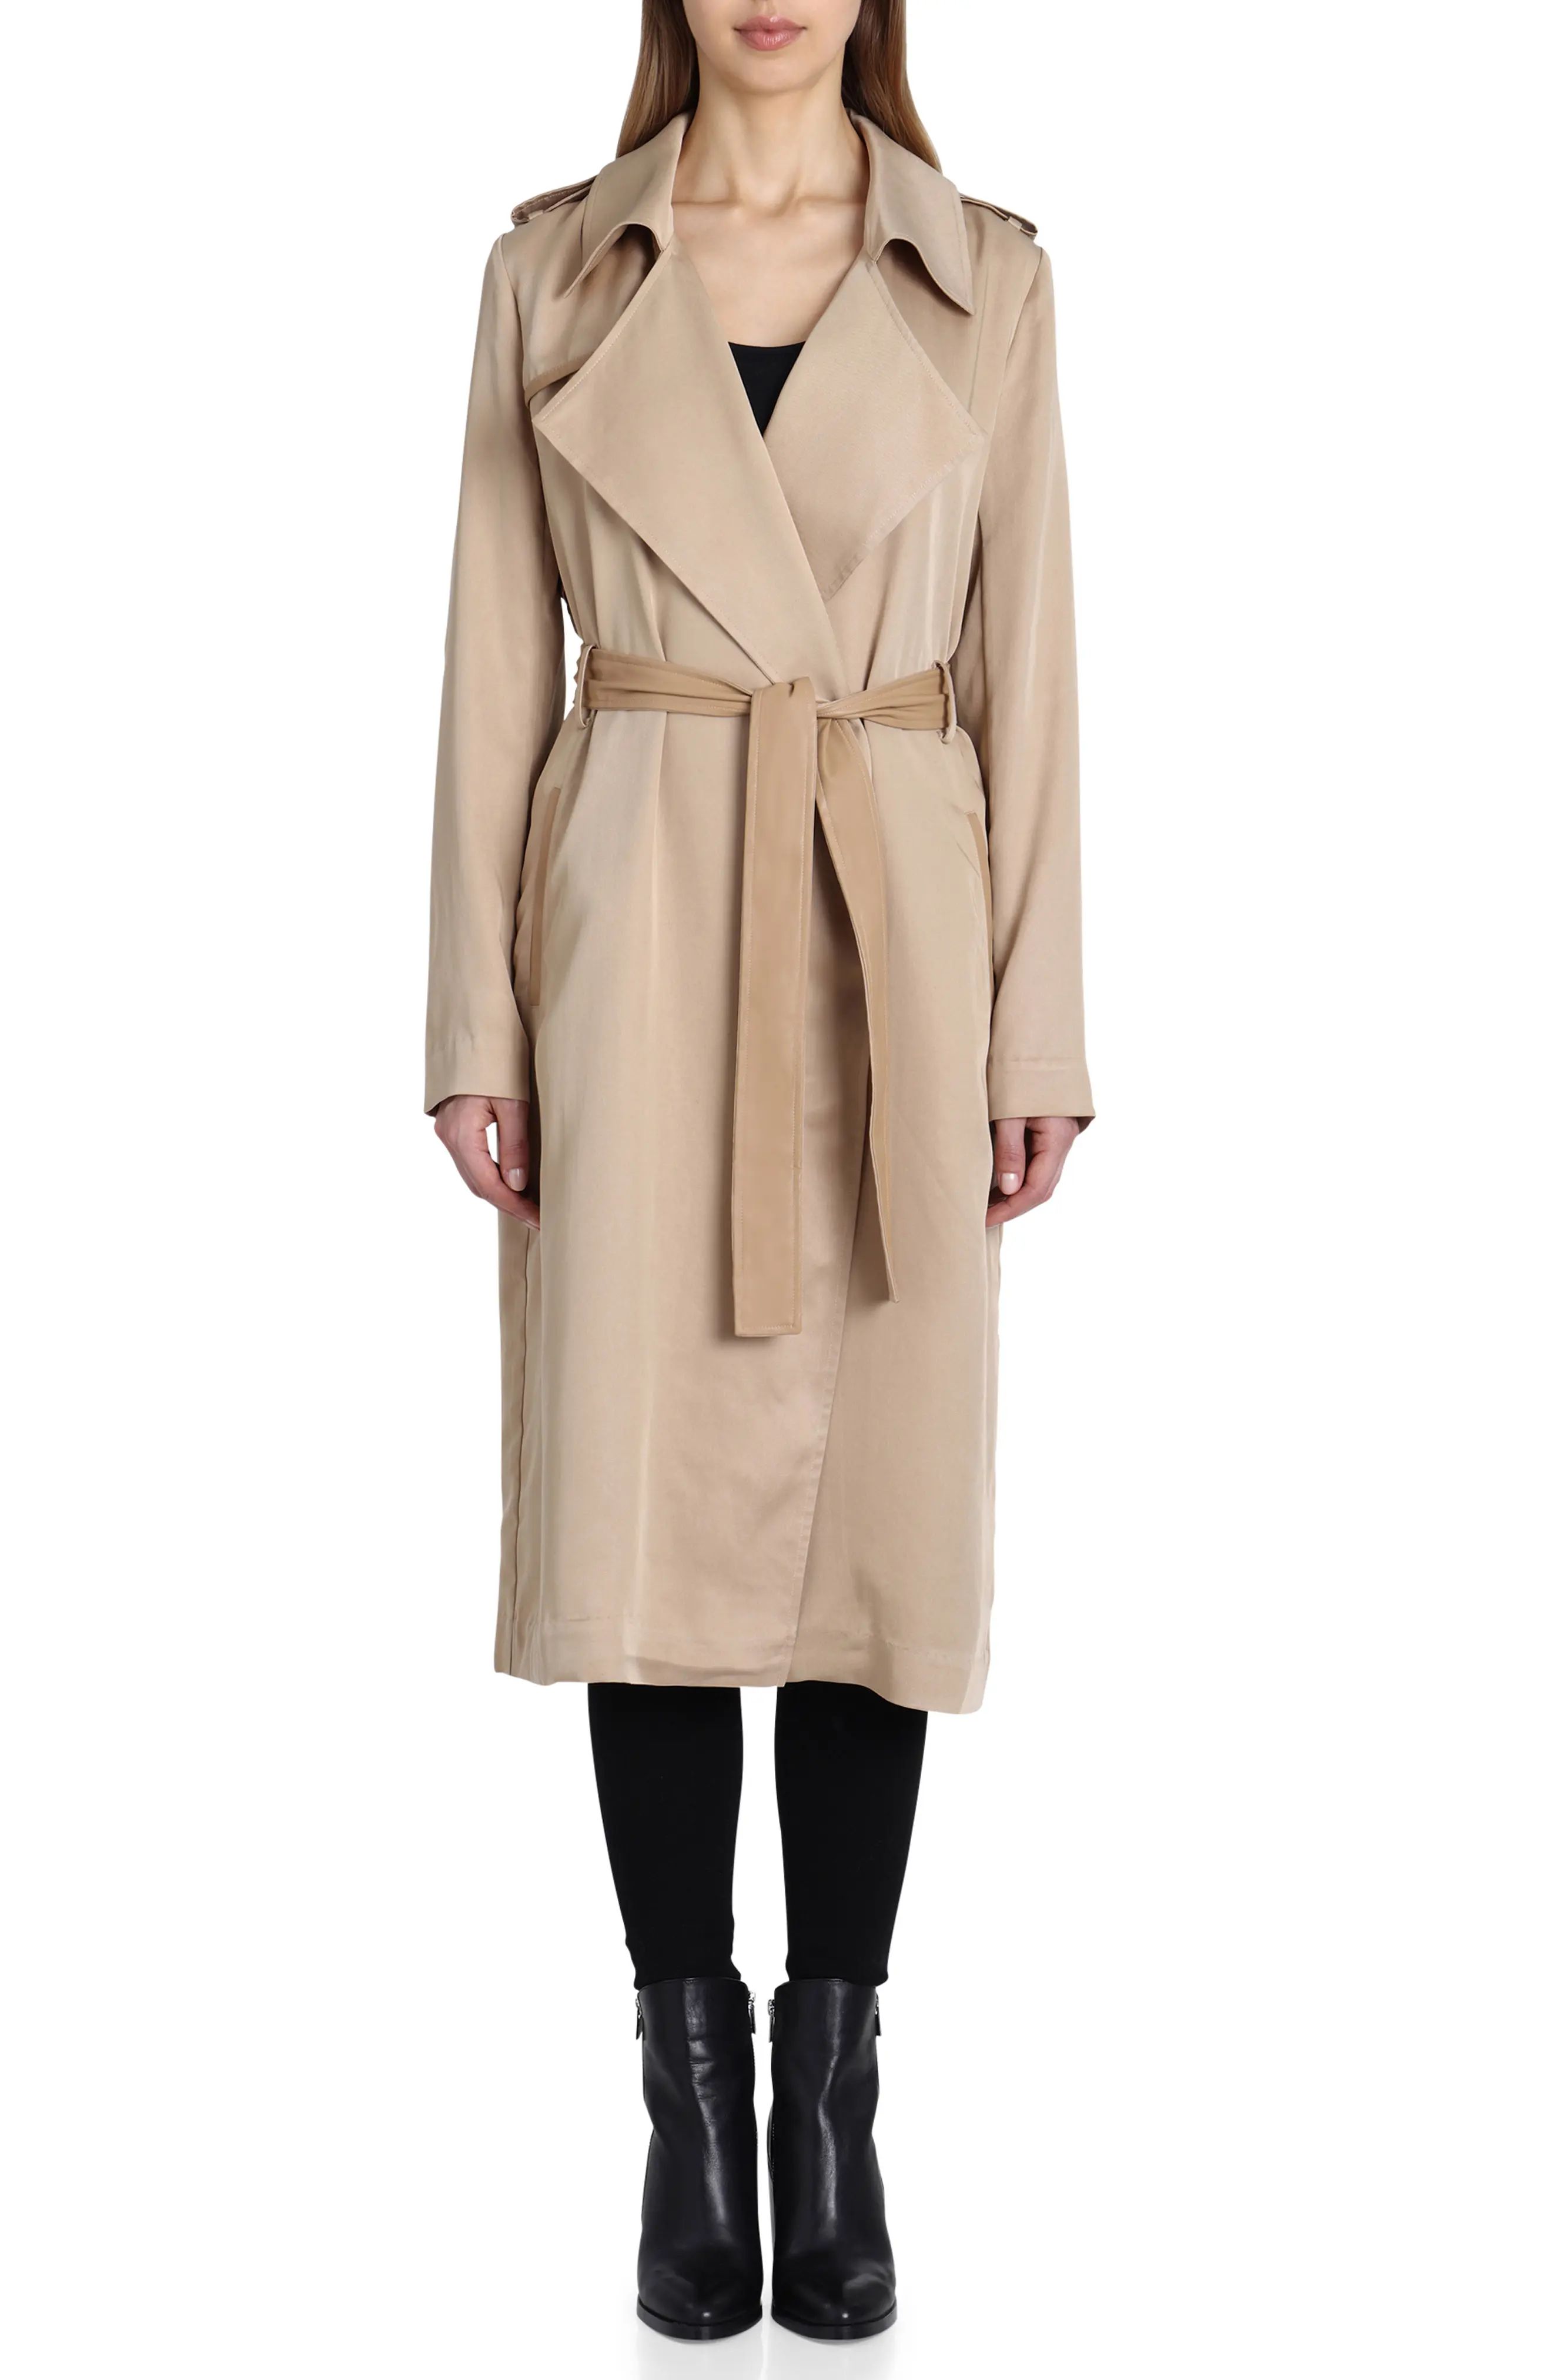 Badgley Mischka Faux Leather Trim Long Trench Coat | Nordstrom